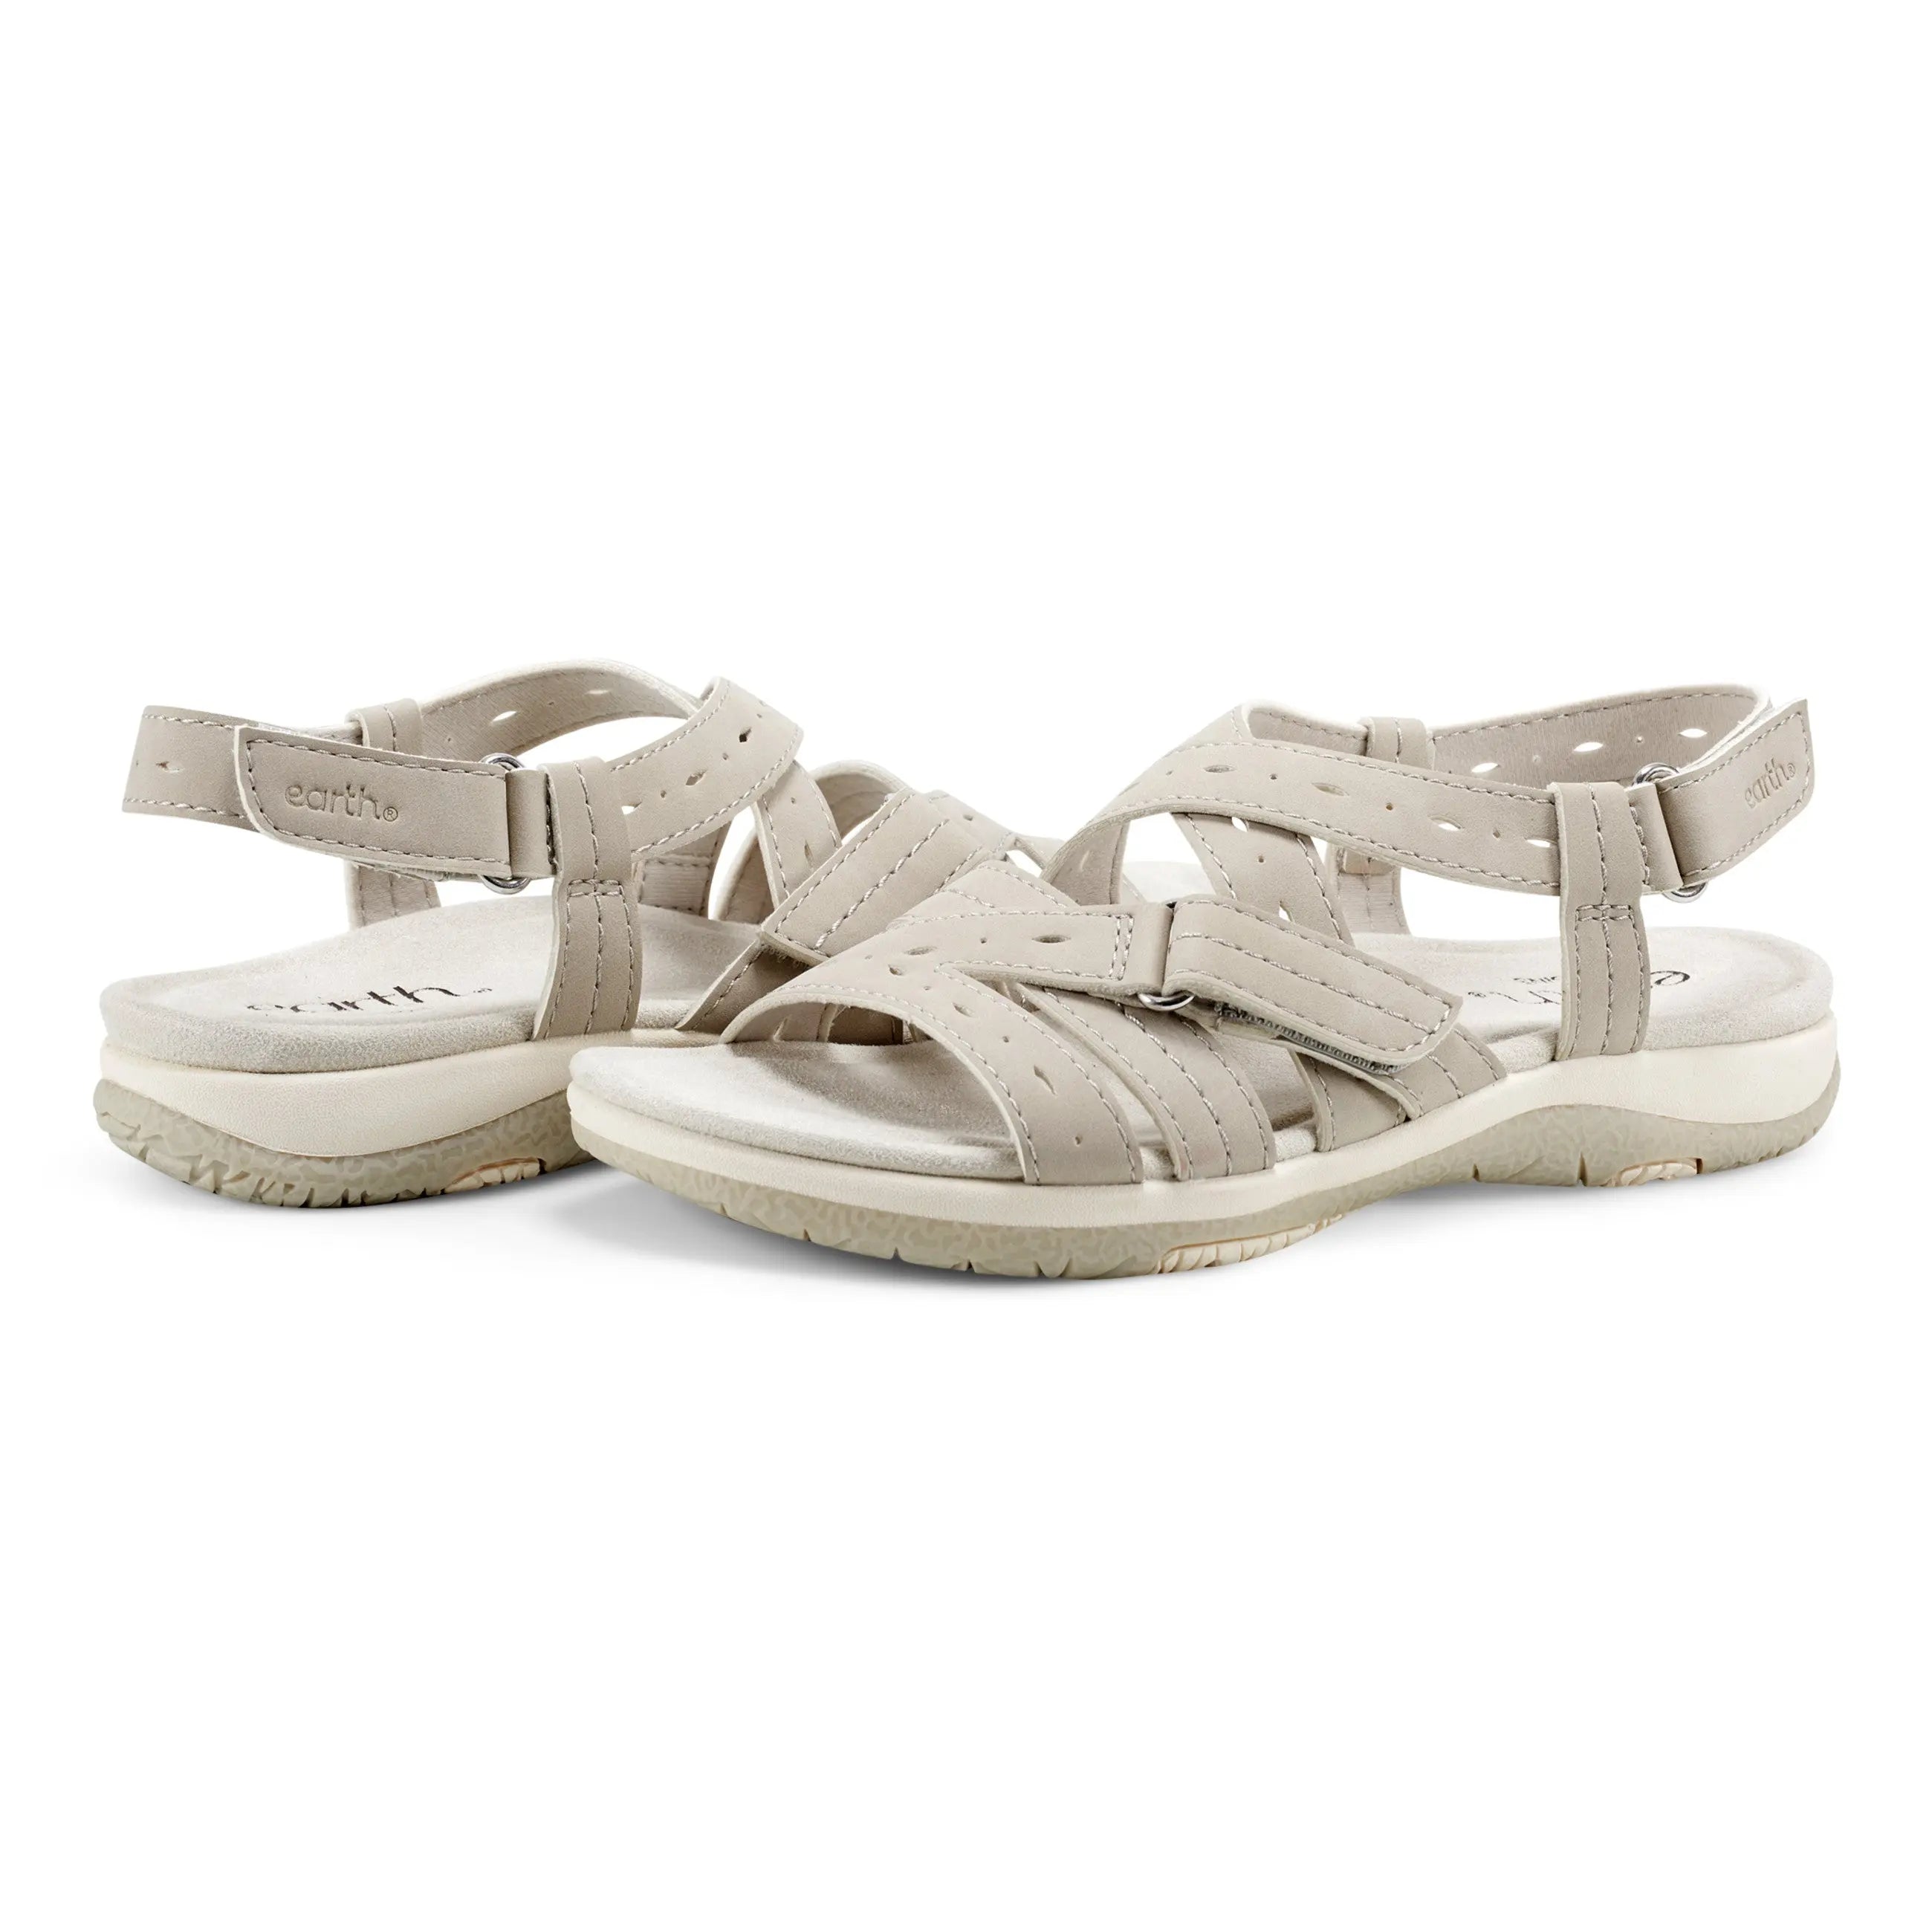 Samsin Round Toe Strappy Casual Flat Sandals